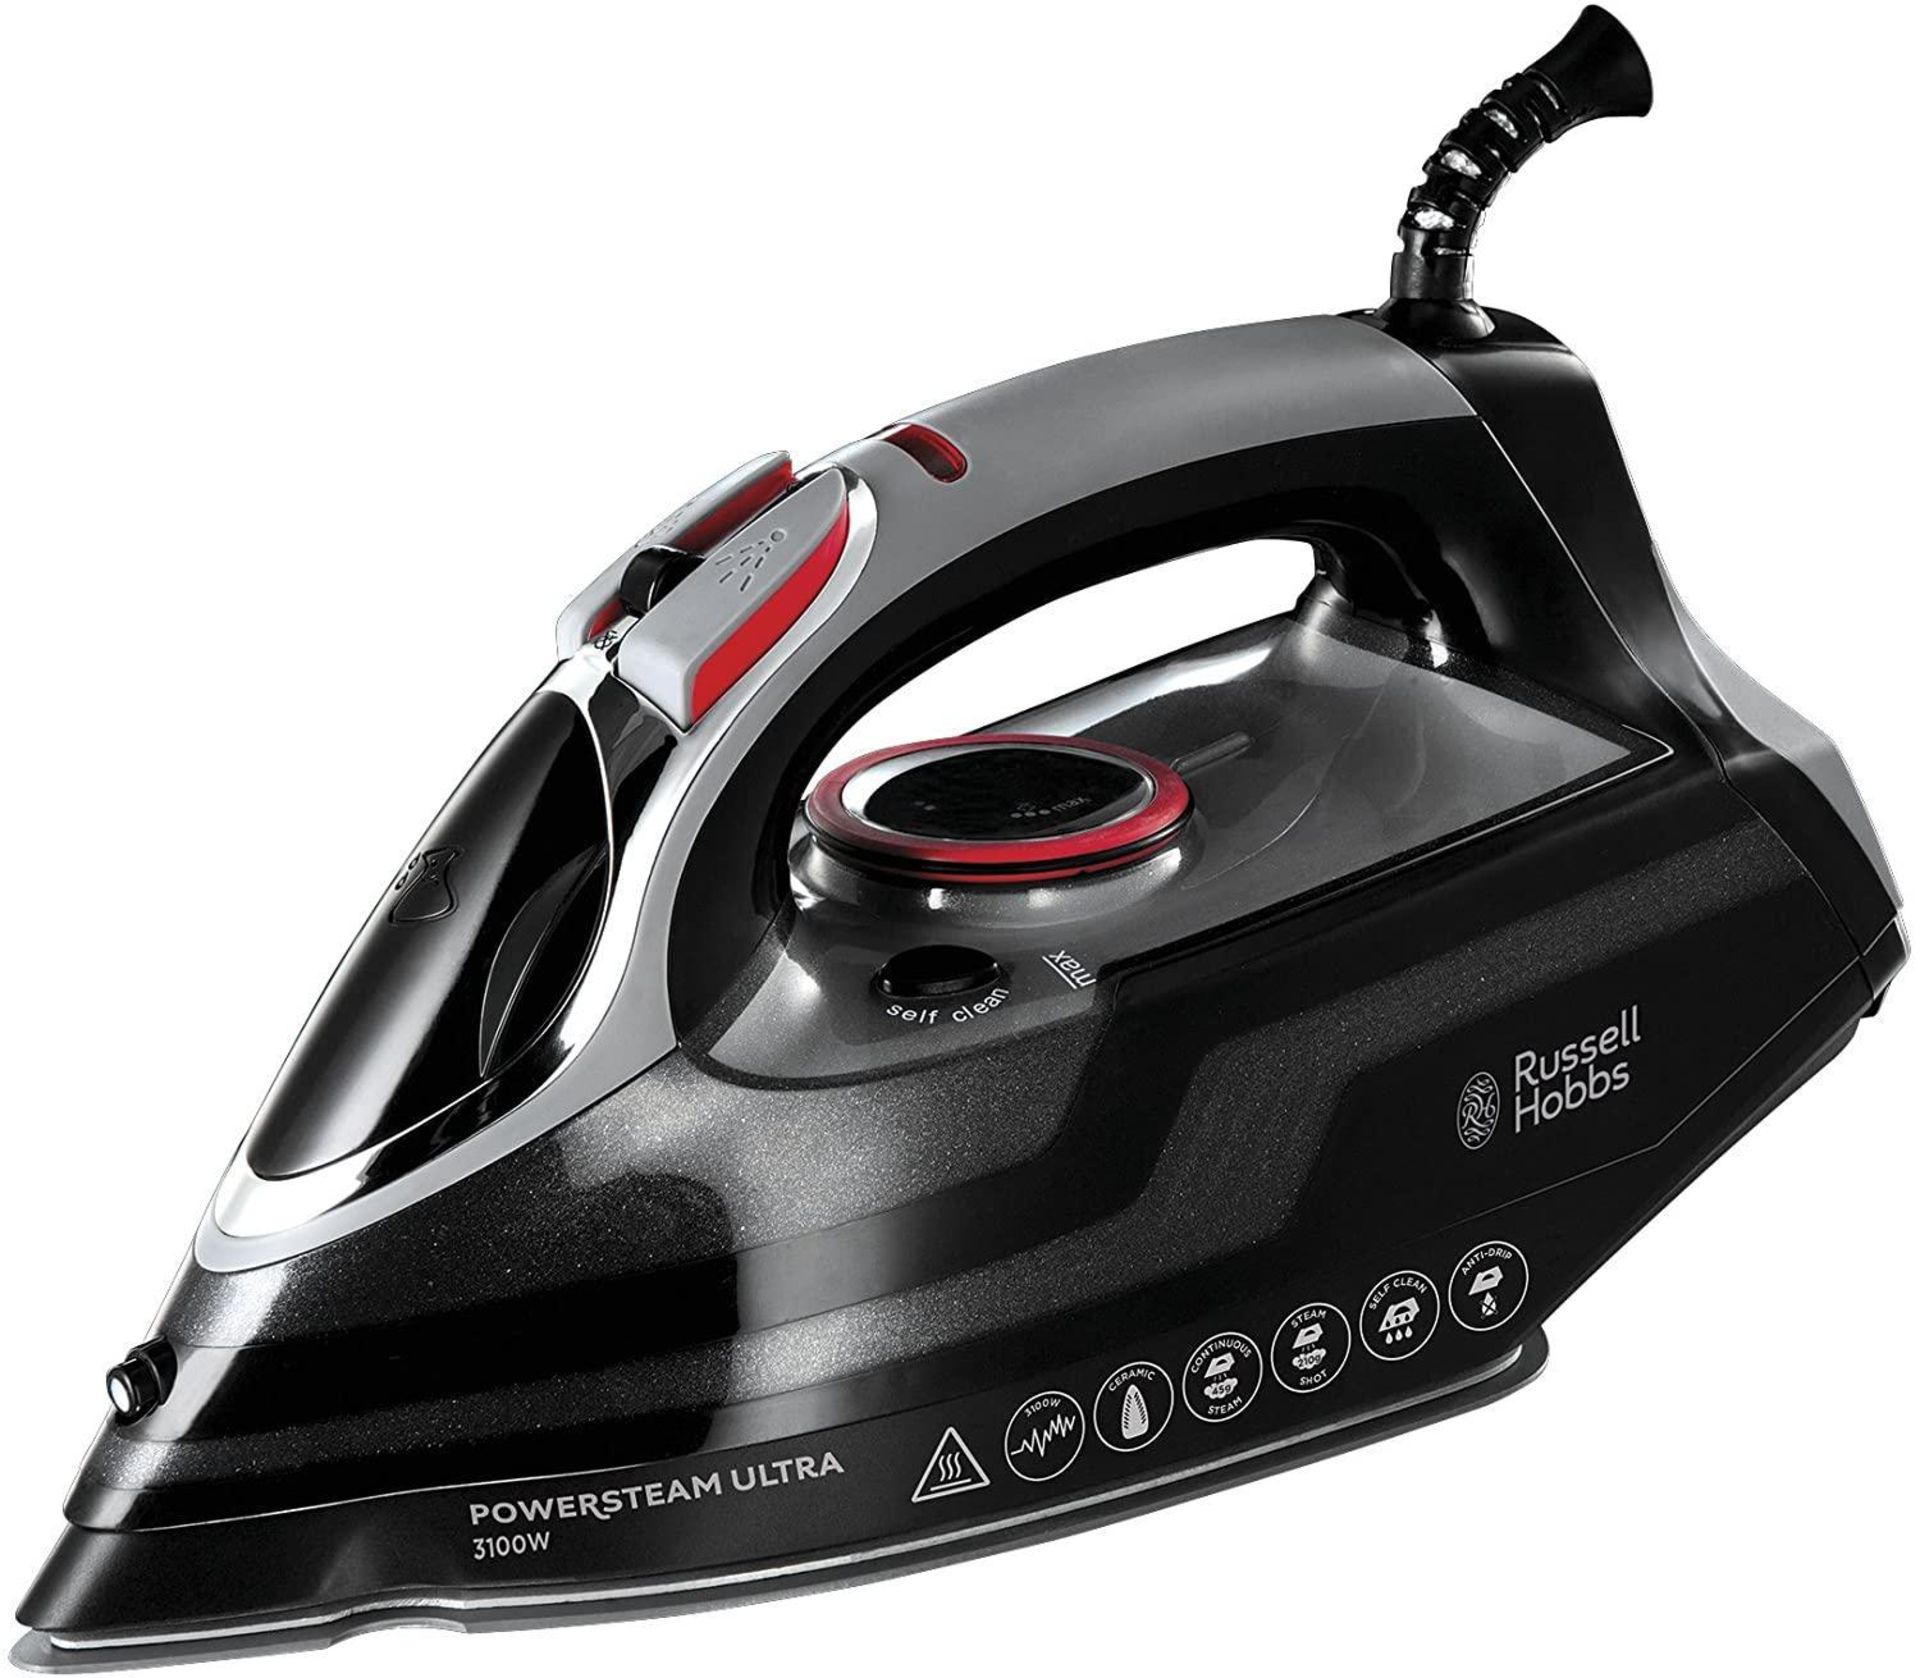 Russell Hobbs Powersteam Ultra 3100 W Vertical Steam Iron 20630 - Black and Grey - £34.99 RRP